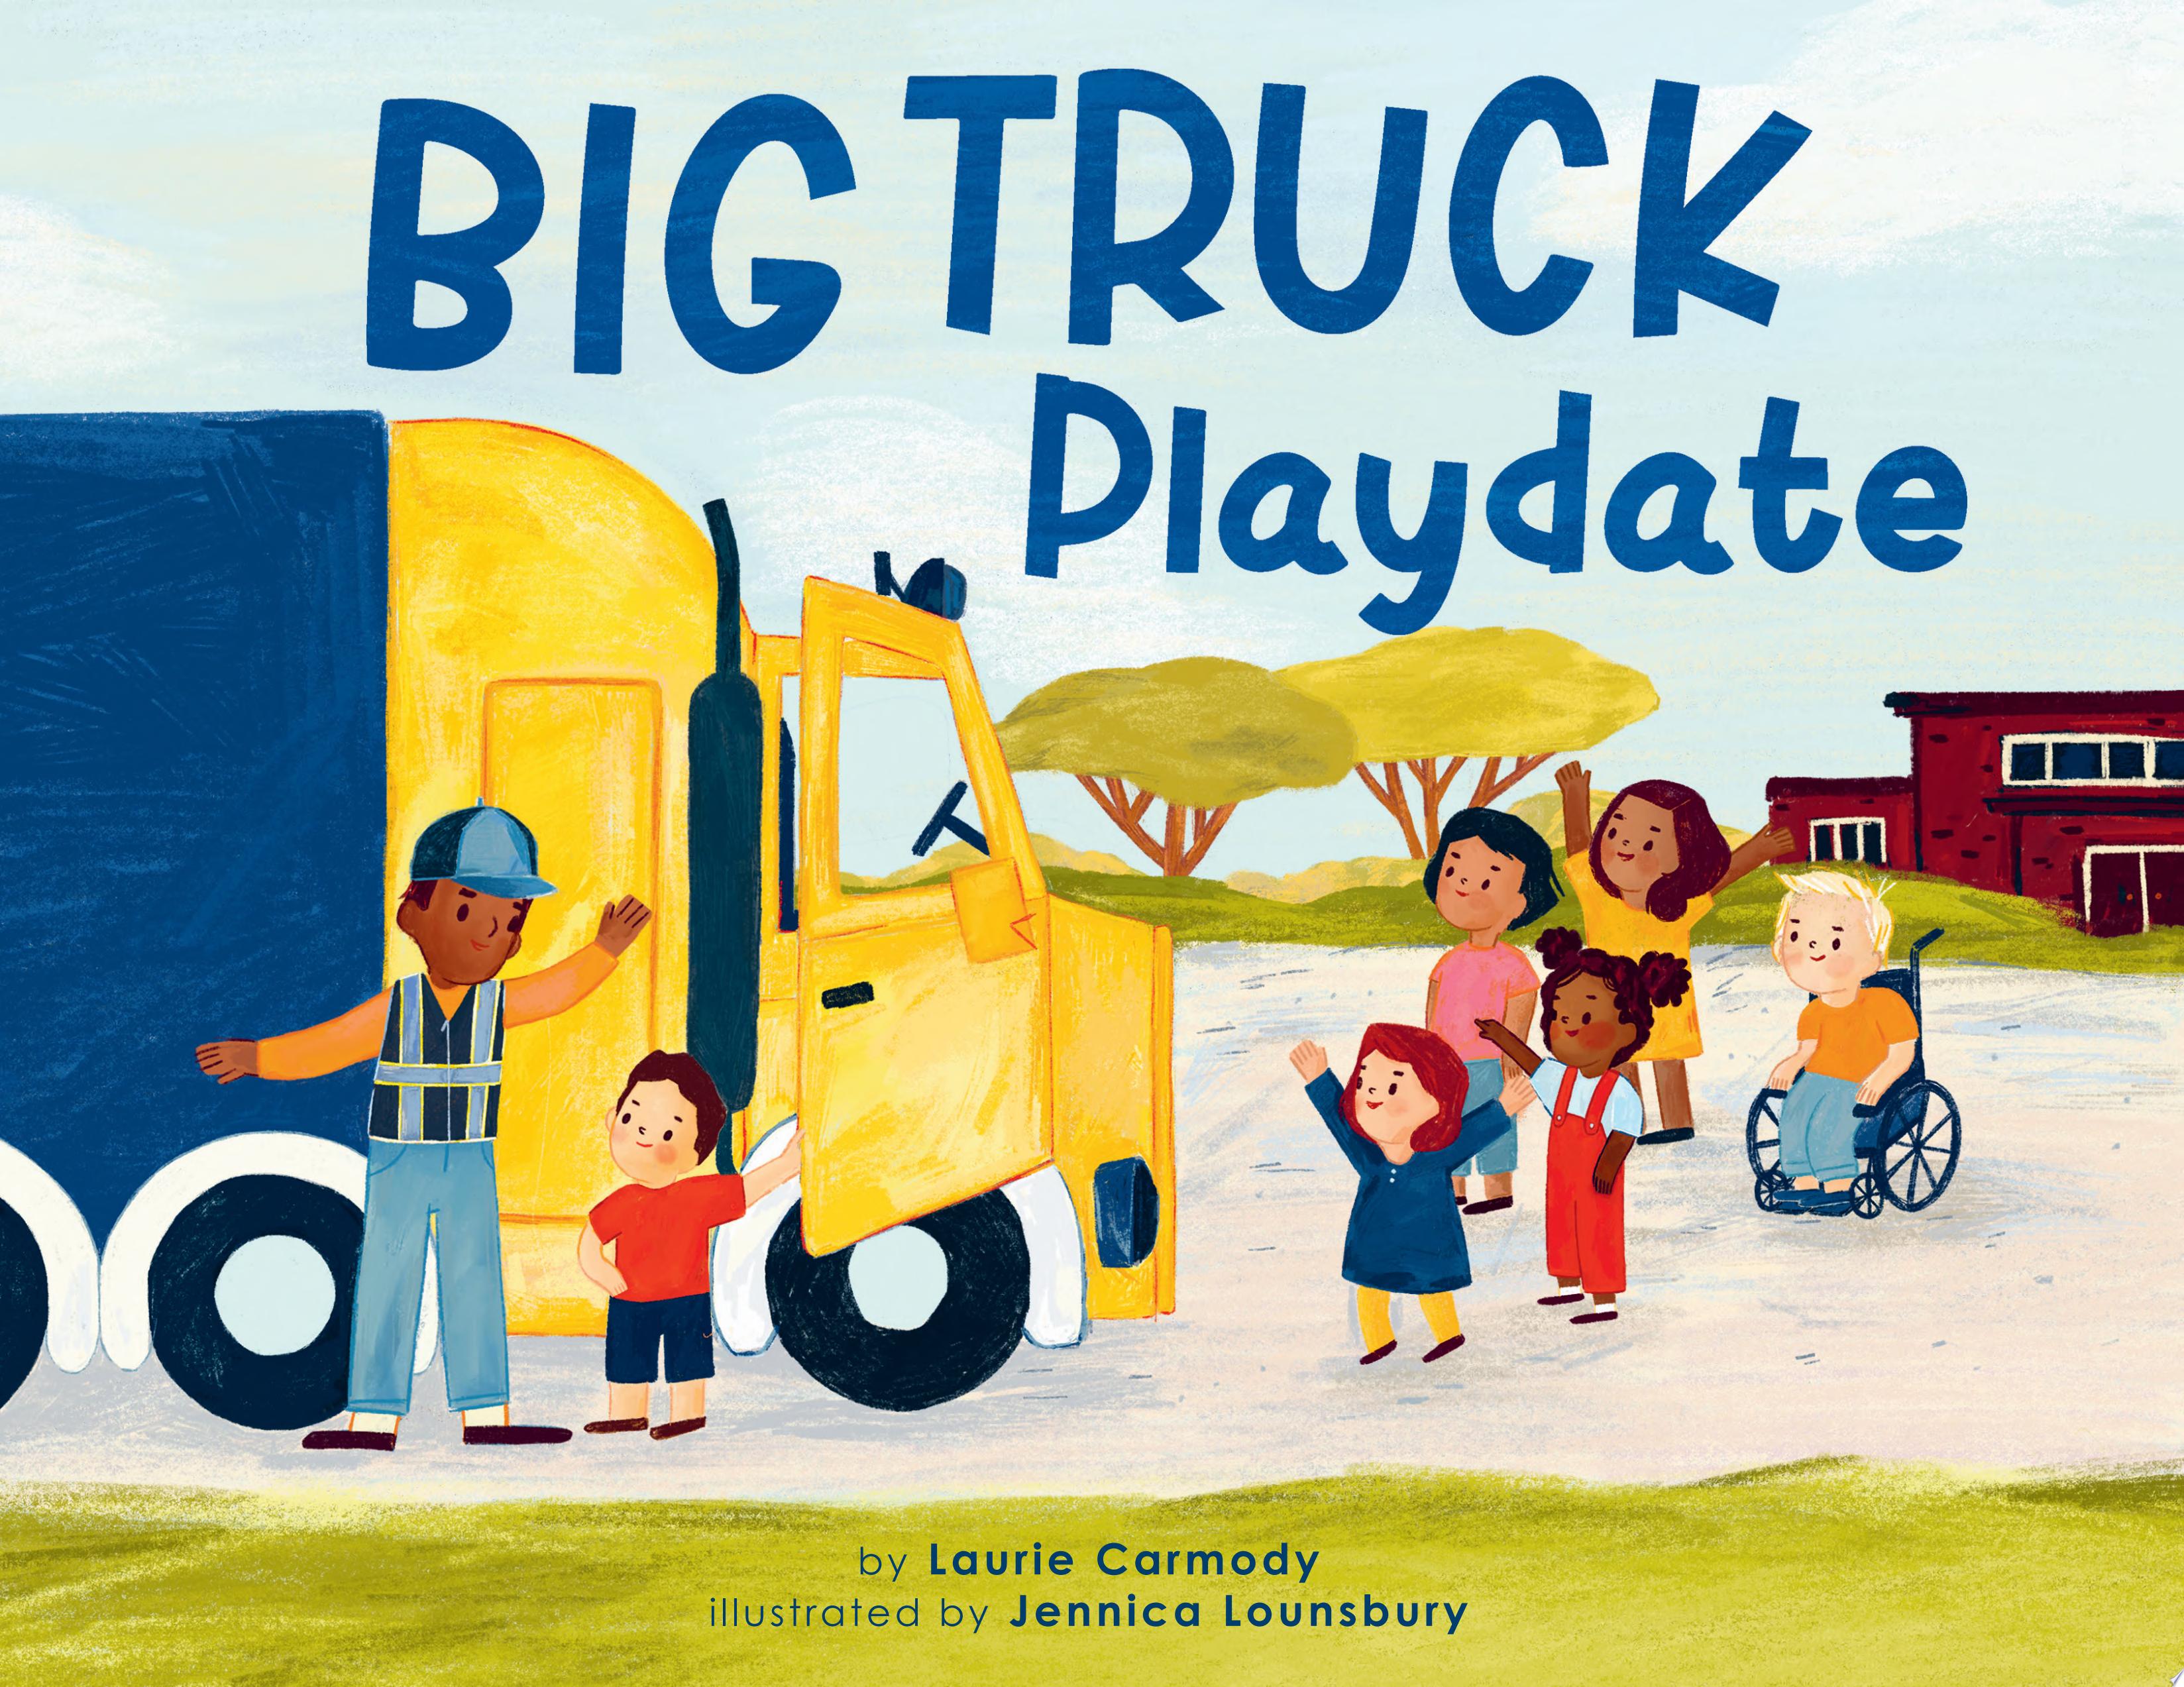 Image for "Big Truck Playdate"